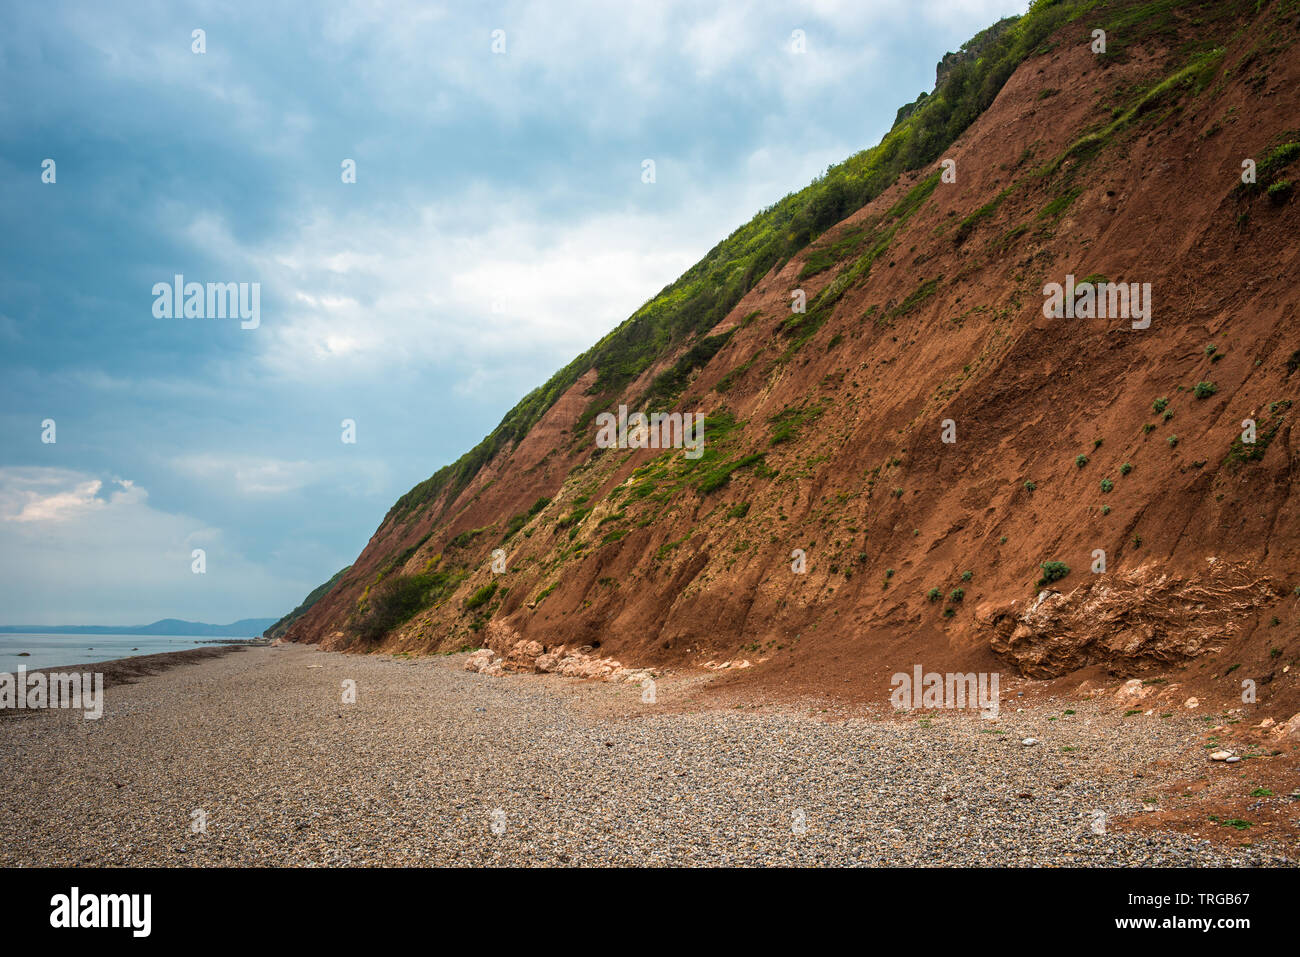 Golden brown cliffs and beach at Branscombe on the Jurassic coast in Devon, England, UK. Stock Photo